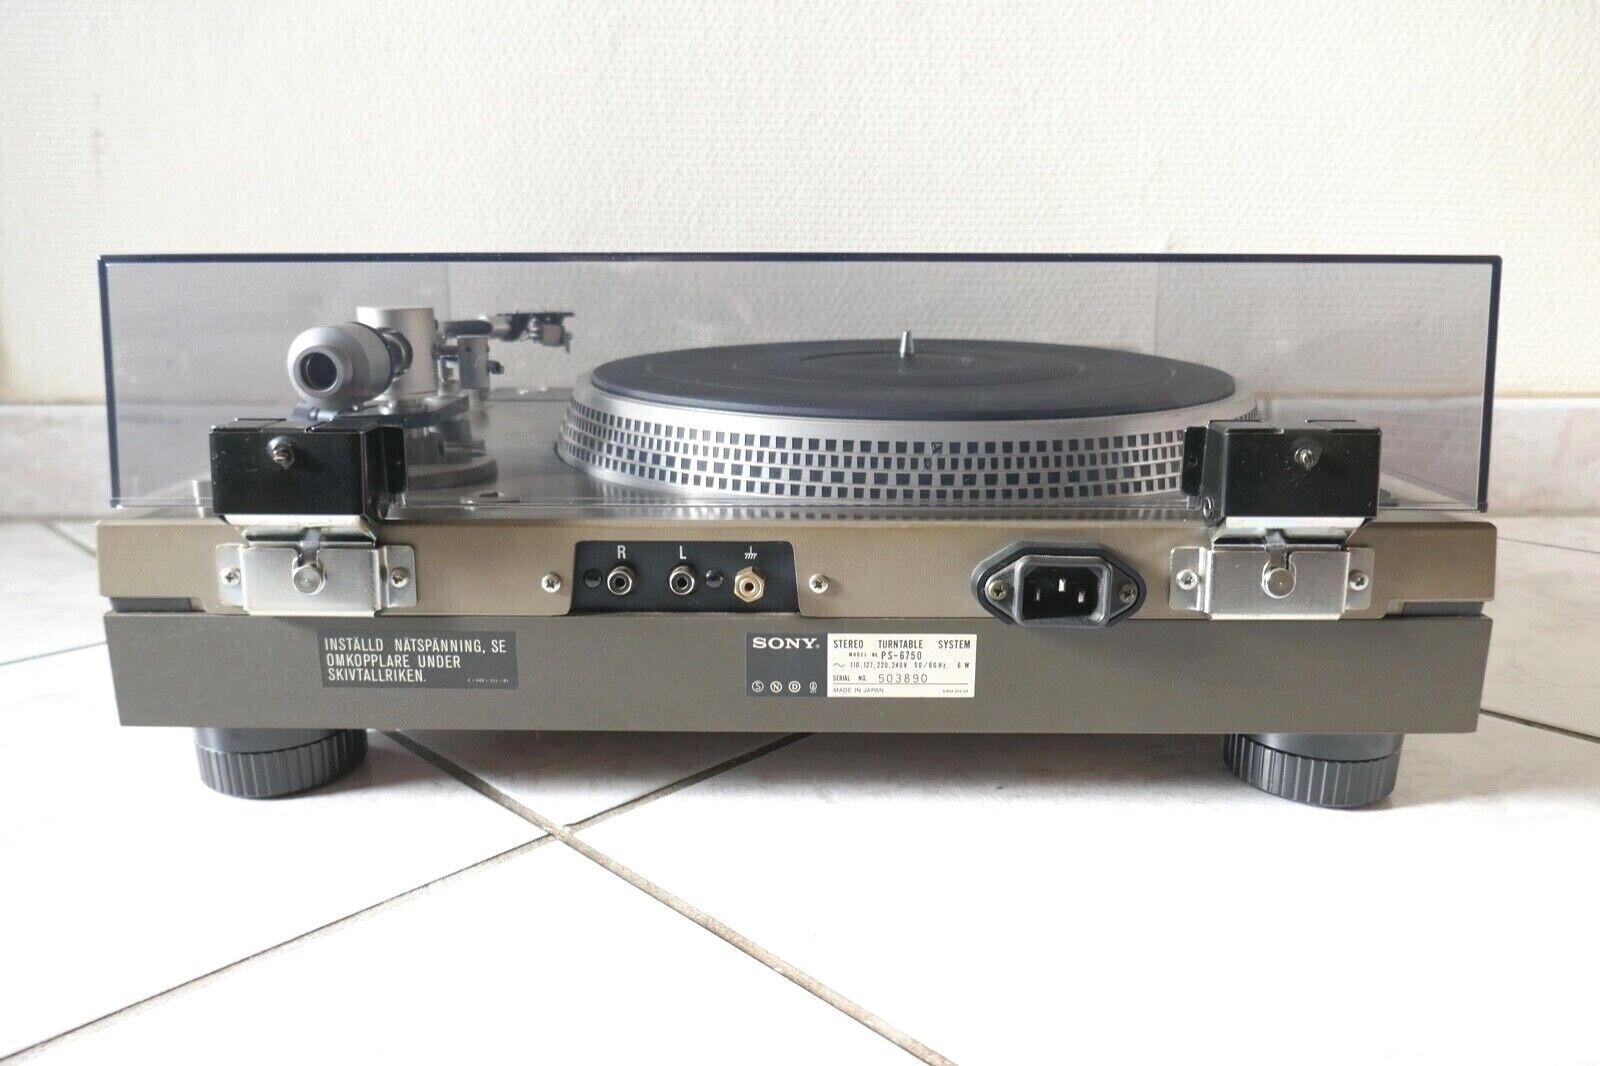 platine vinyle turntable sony PS-6750 vintage occasion